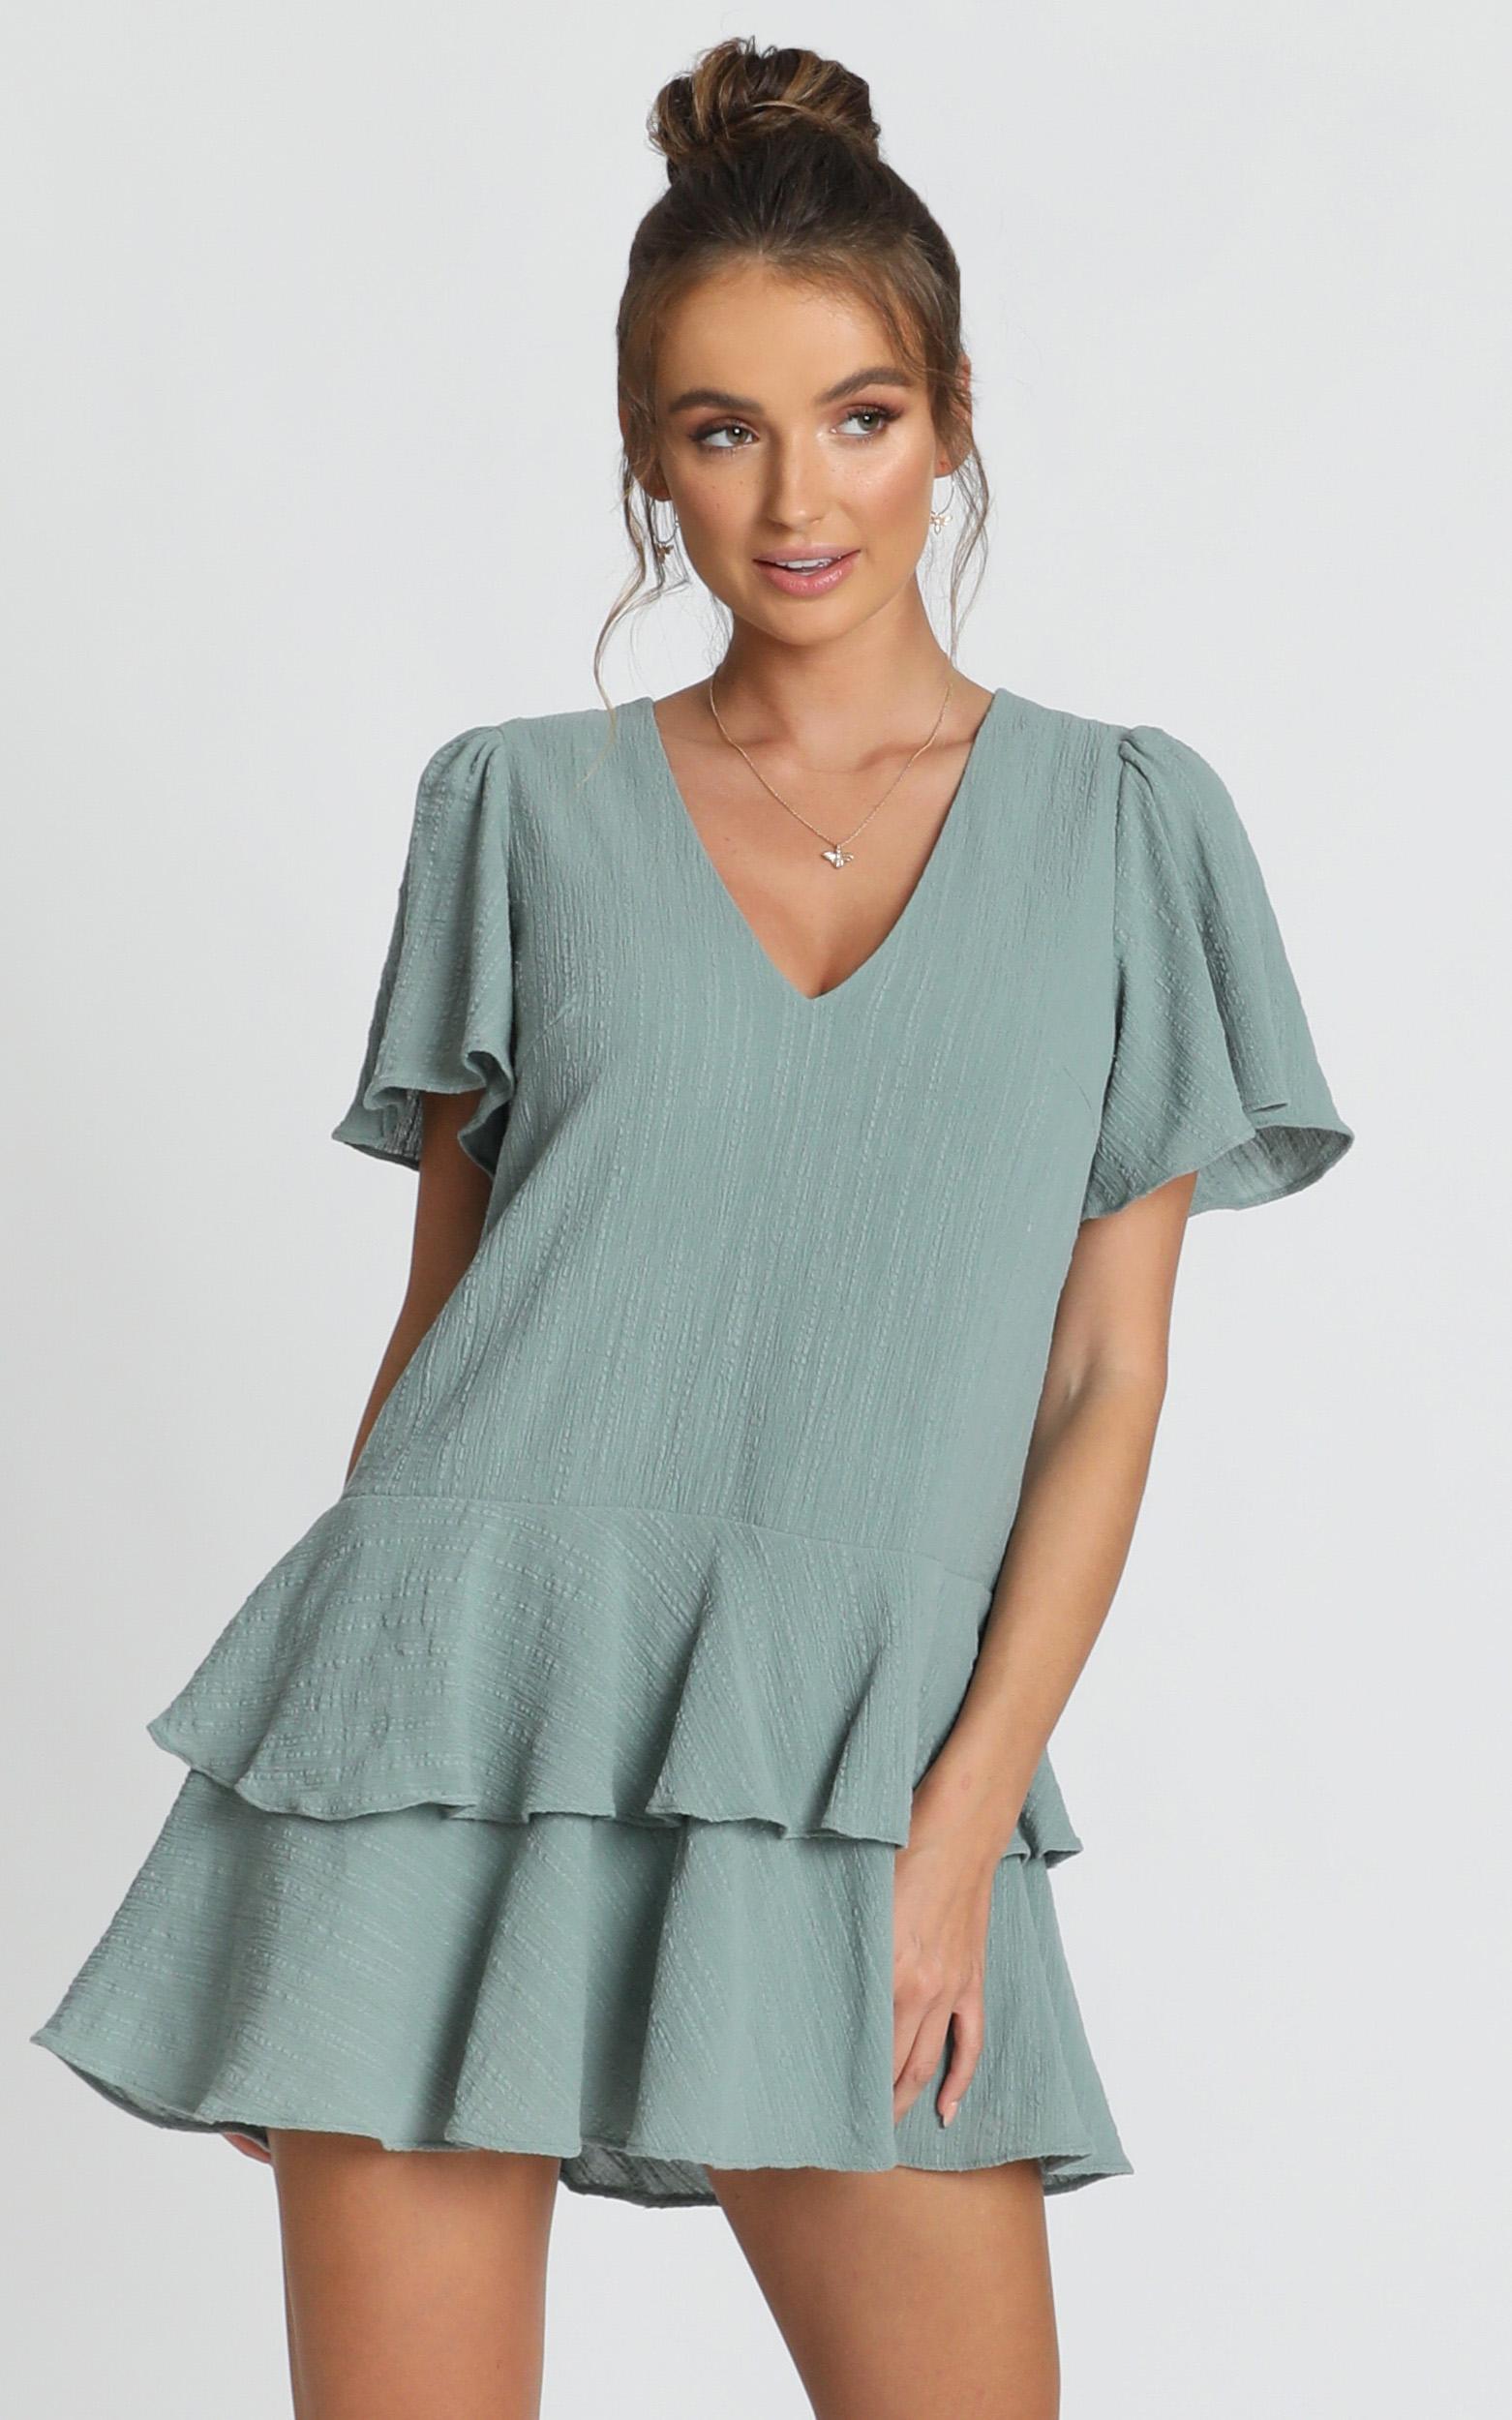 Bahama Baby Dress in Sage - 04, GRN3, hi-res image number null